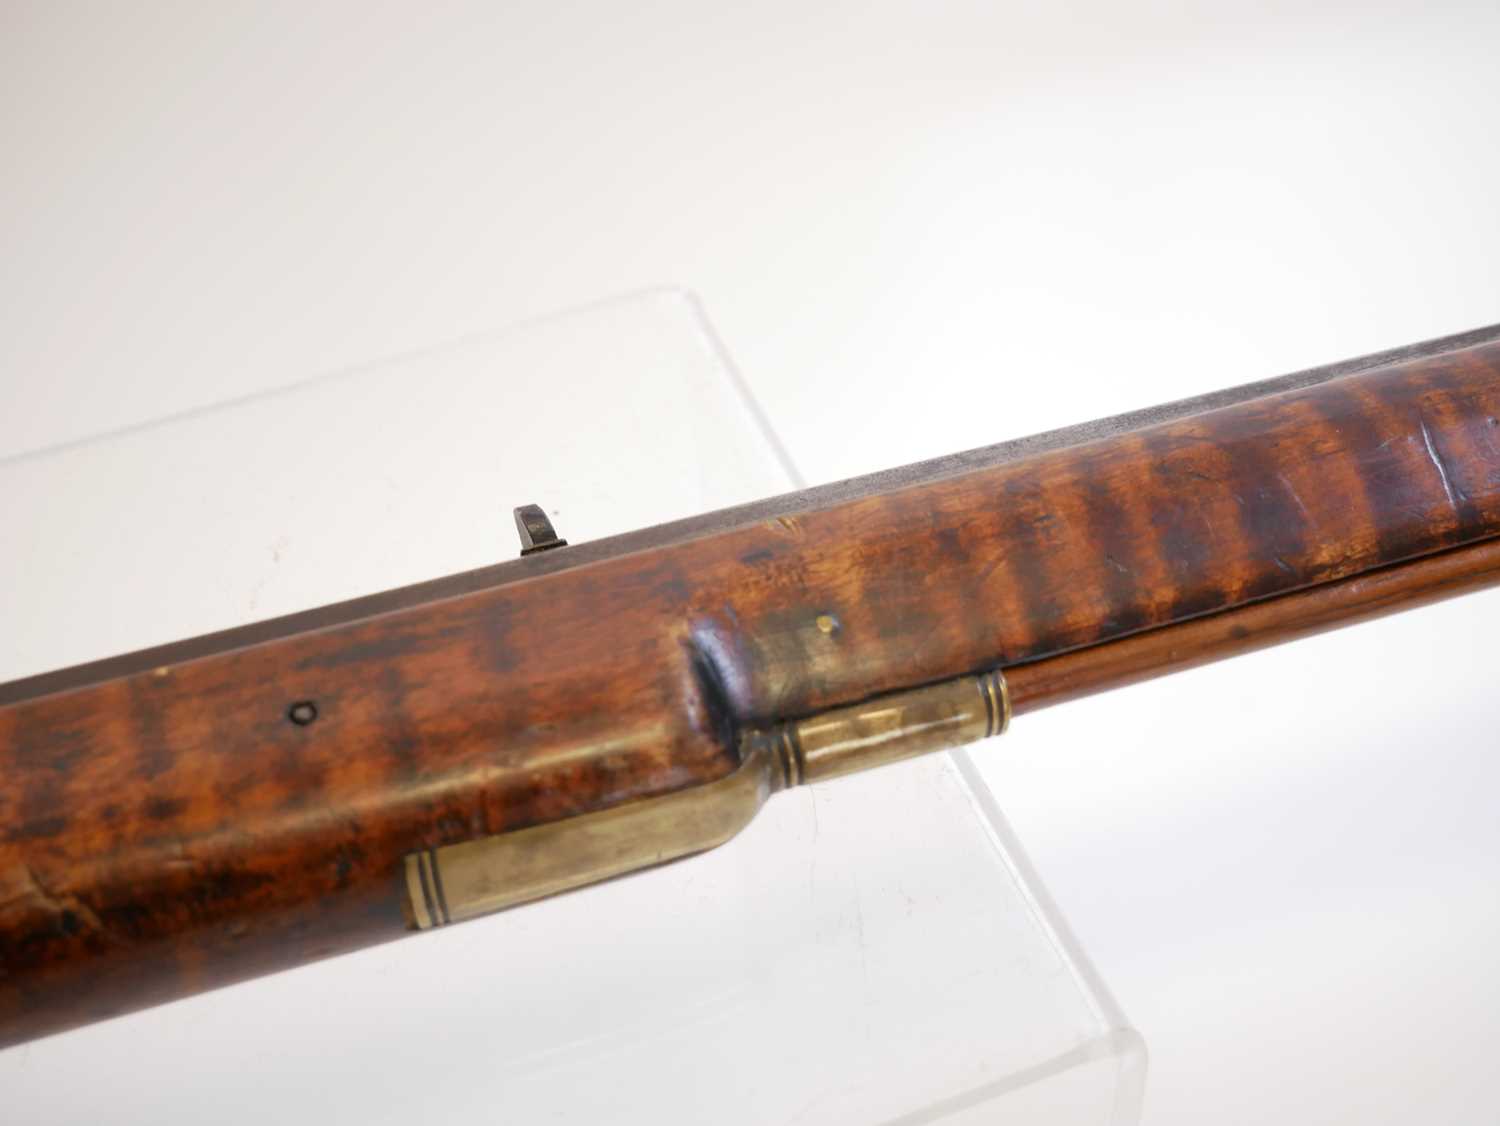 American percussion 130 bore Kentucky type rifle, 29.5inch octagonal barrel fitted with buckhorn - Image 9 of 17